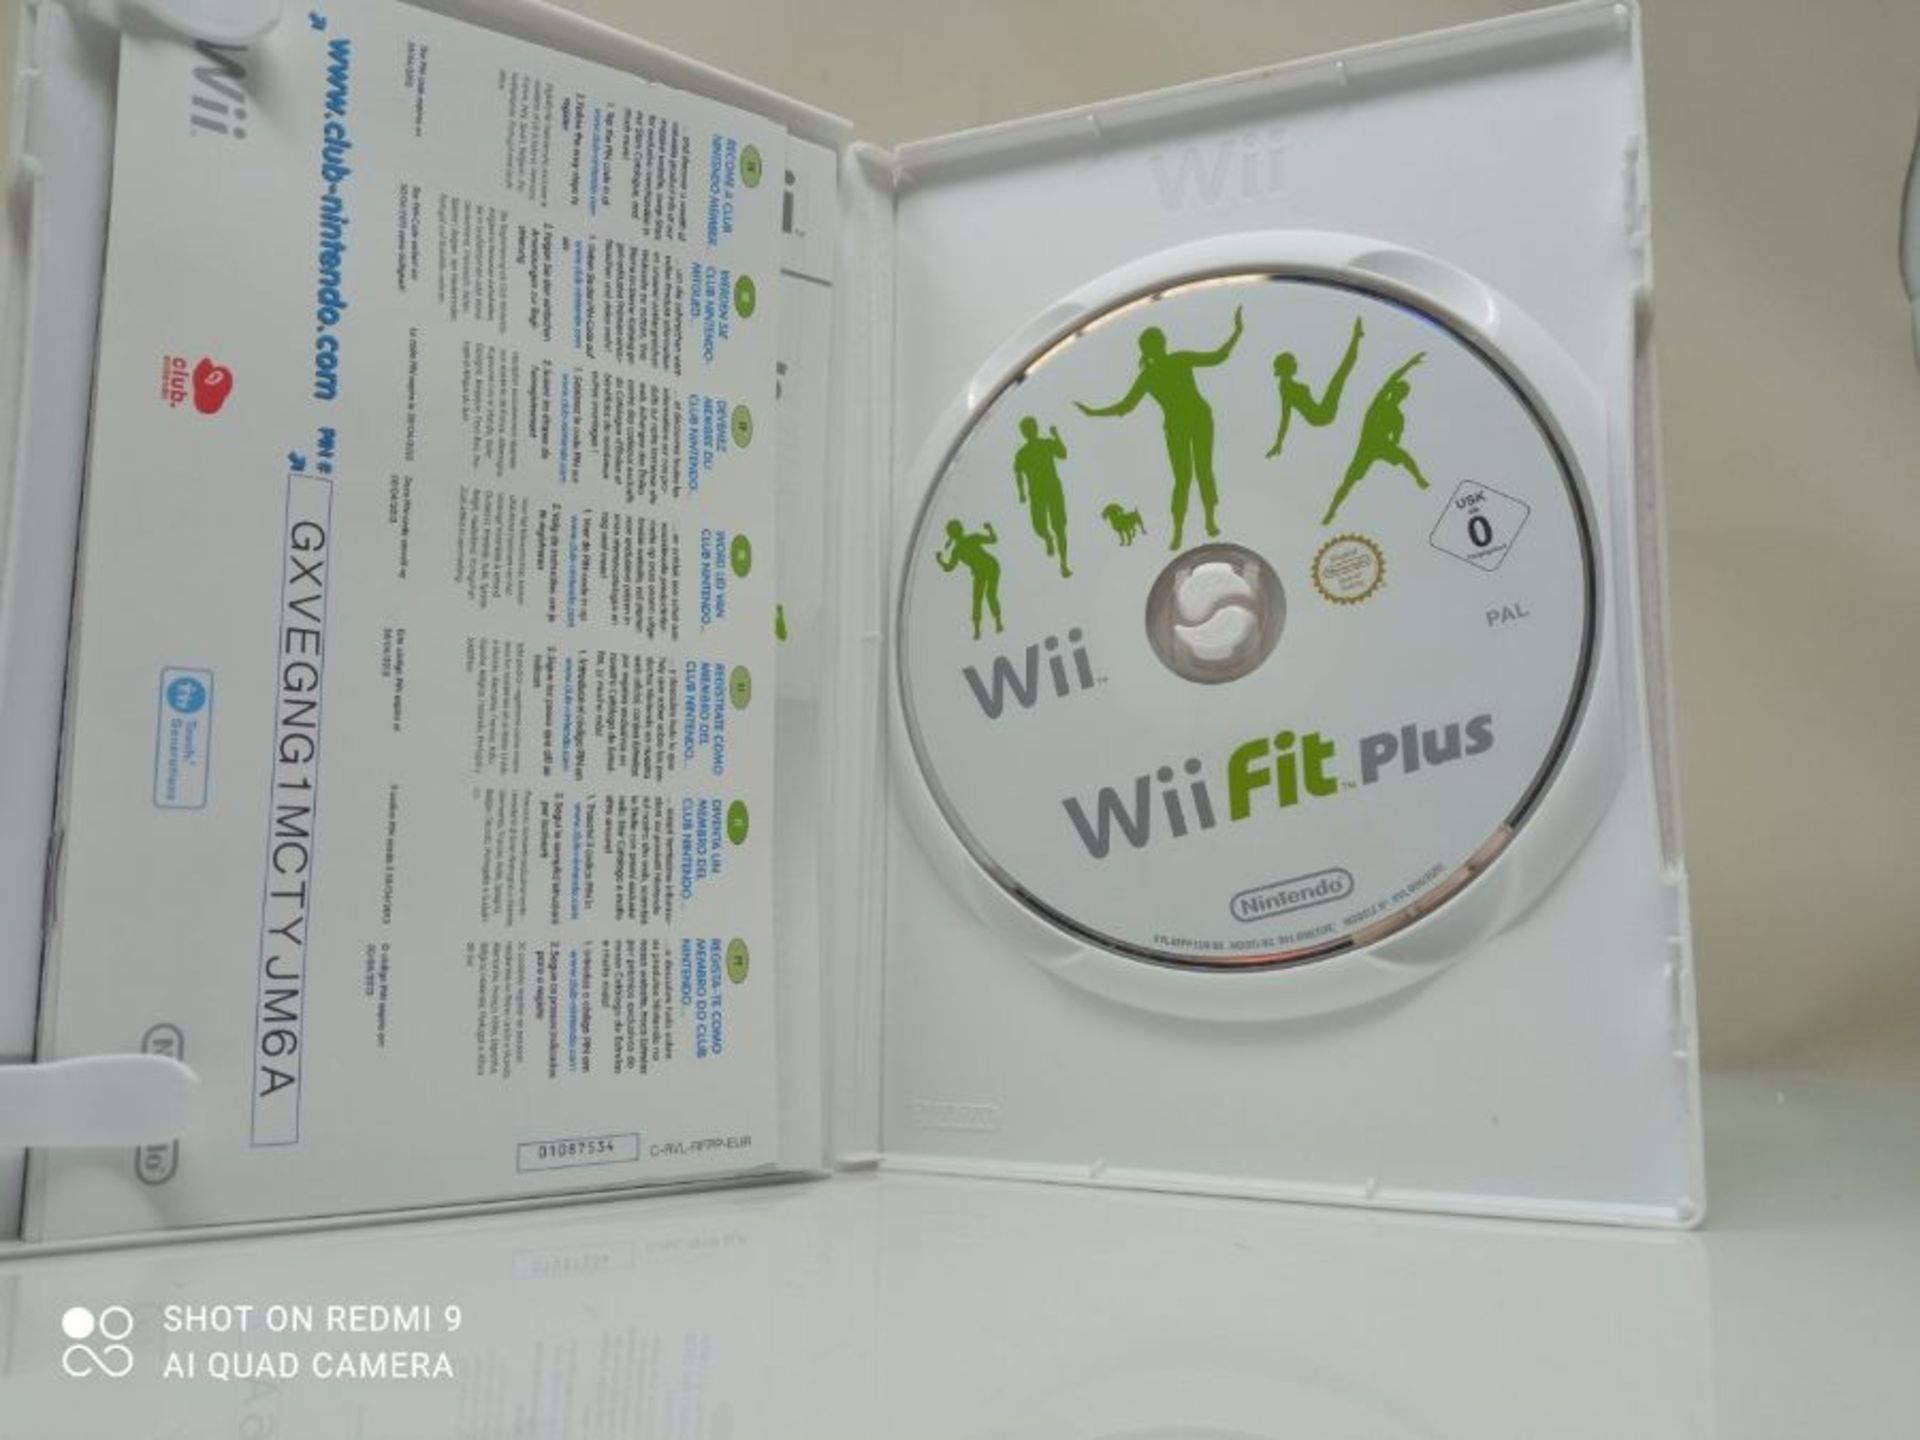 Wii Fit Plus game - Image 3 of 6